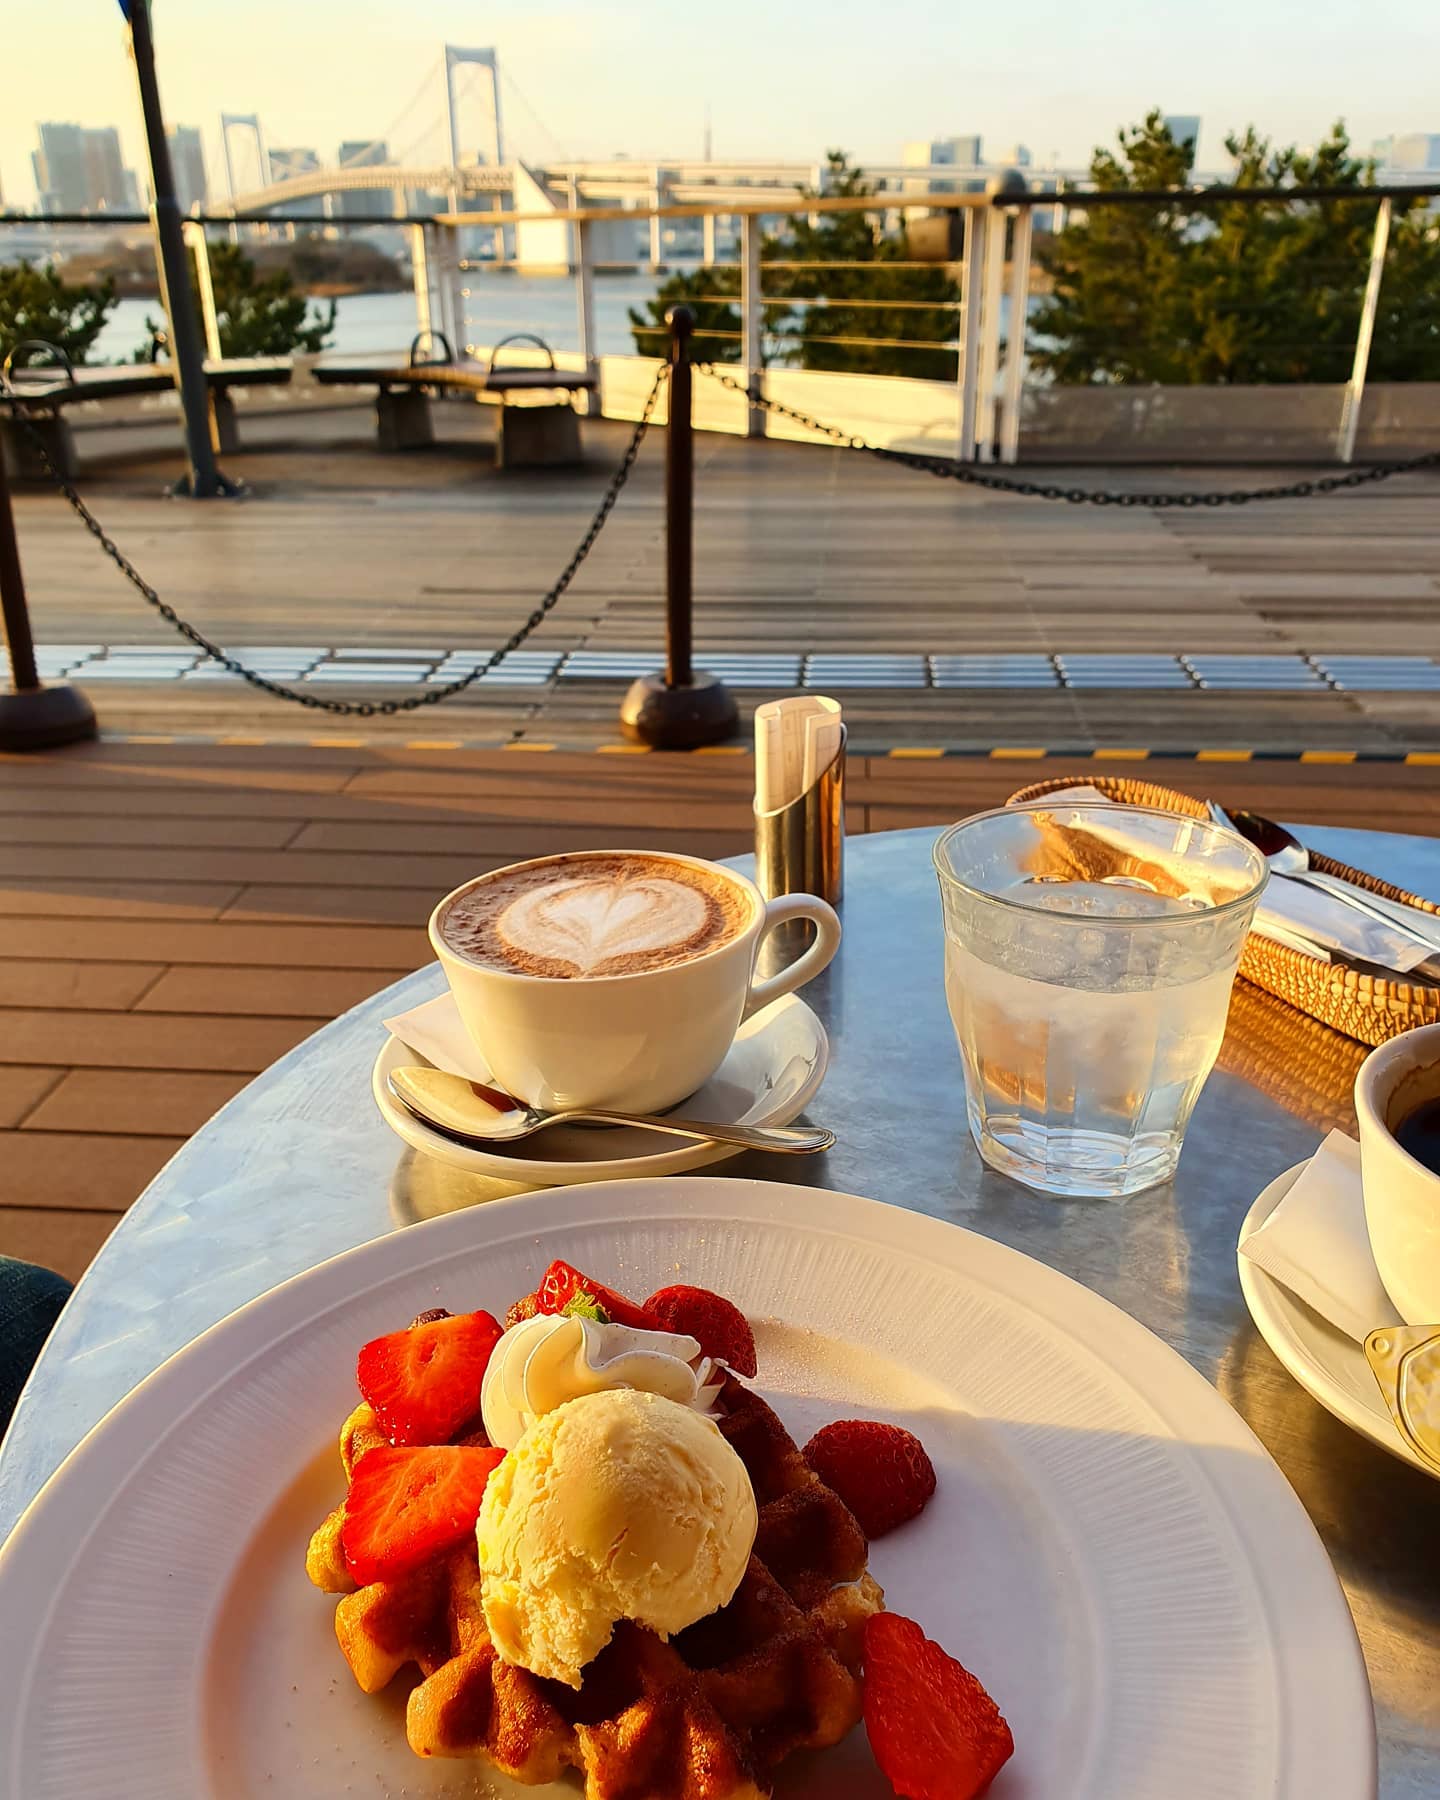 Coffee pause on a terrace with a view, enjoying the moment, the golden hour before the sunset, and a great company 😊☕🗼
.
.
.
.
.
#weekend #weekendvibes #outdoors #chilling #coffee #dessert #enjoy #moment #tokyo #rainbowbridge #goldenhour #beforesunset #happy #lifeintokyo #lifeisgood #springiscoming #photooftheday